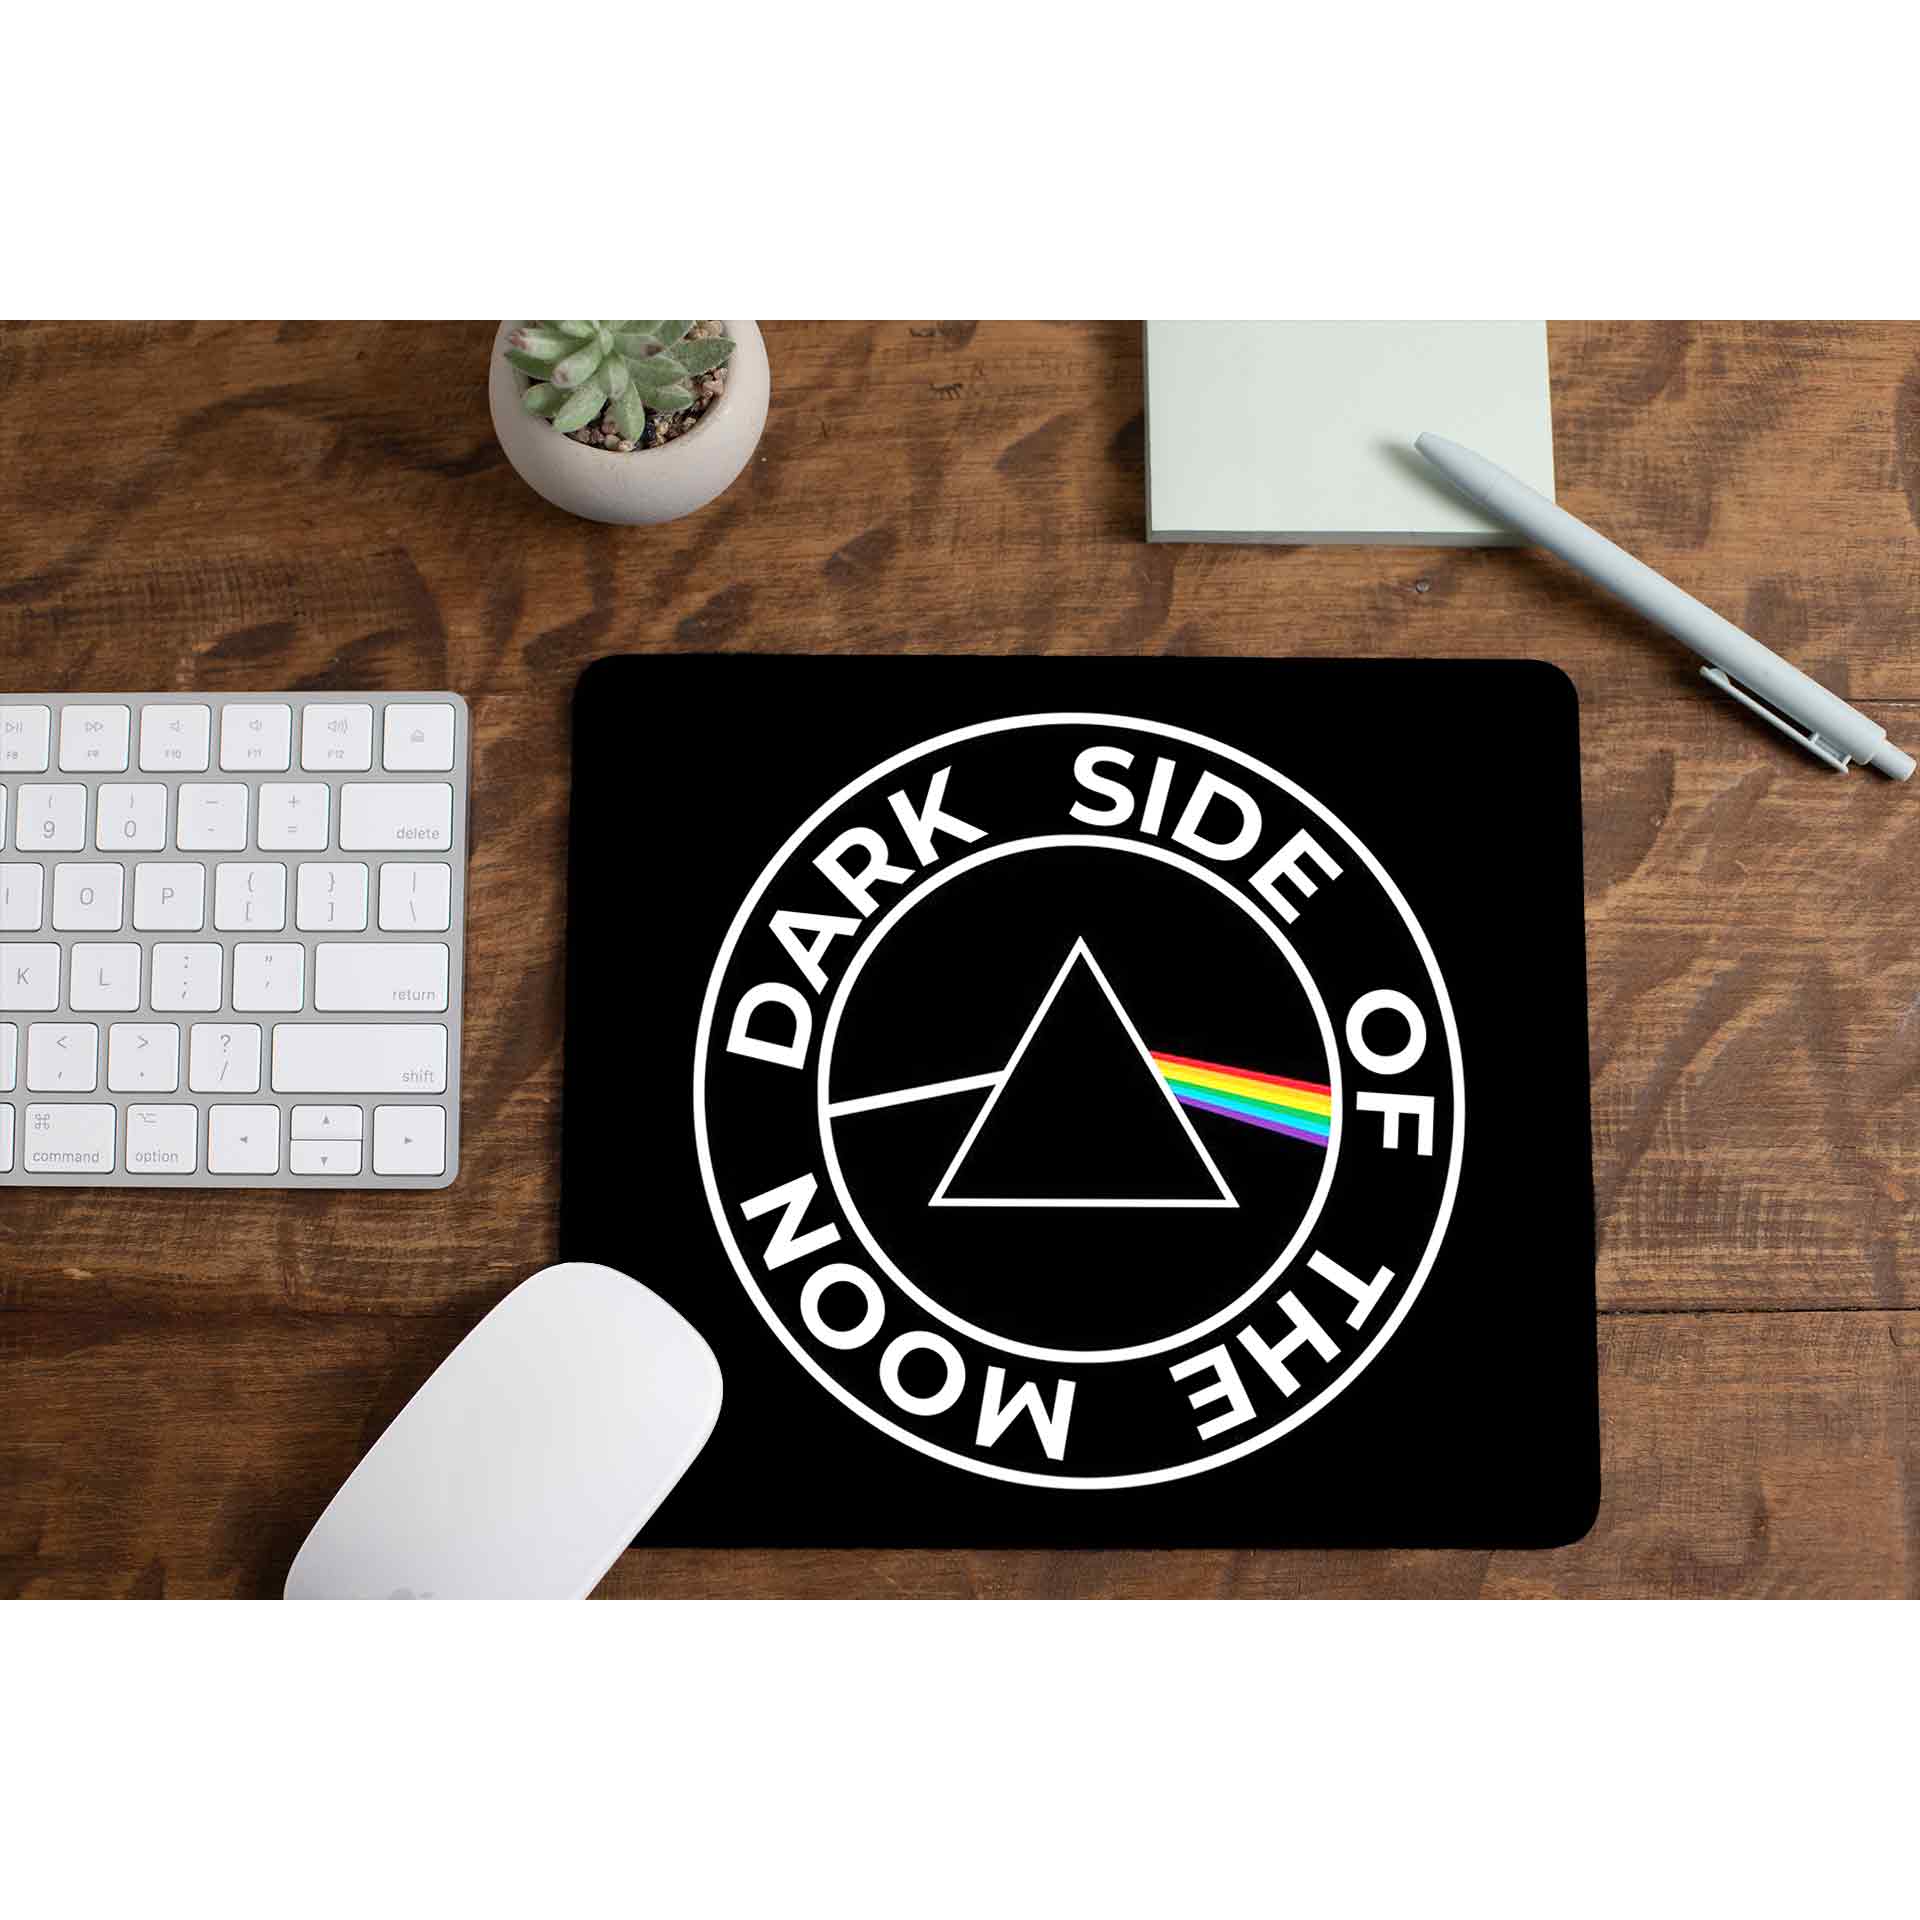 Pink Floyd Mousepad gaming logitech mouse pad large online price - Dark Side Of The Moon The Banyan Tee TBT